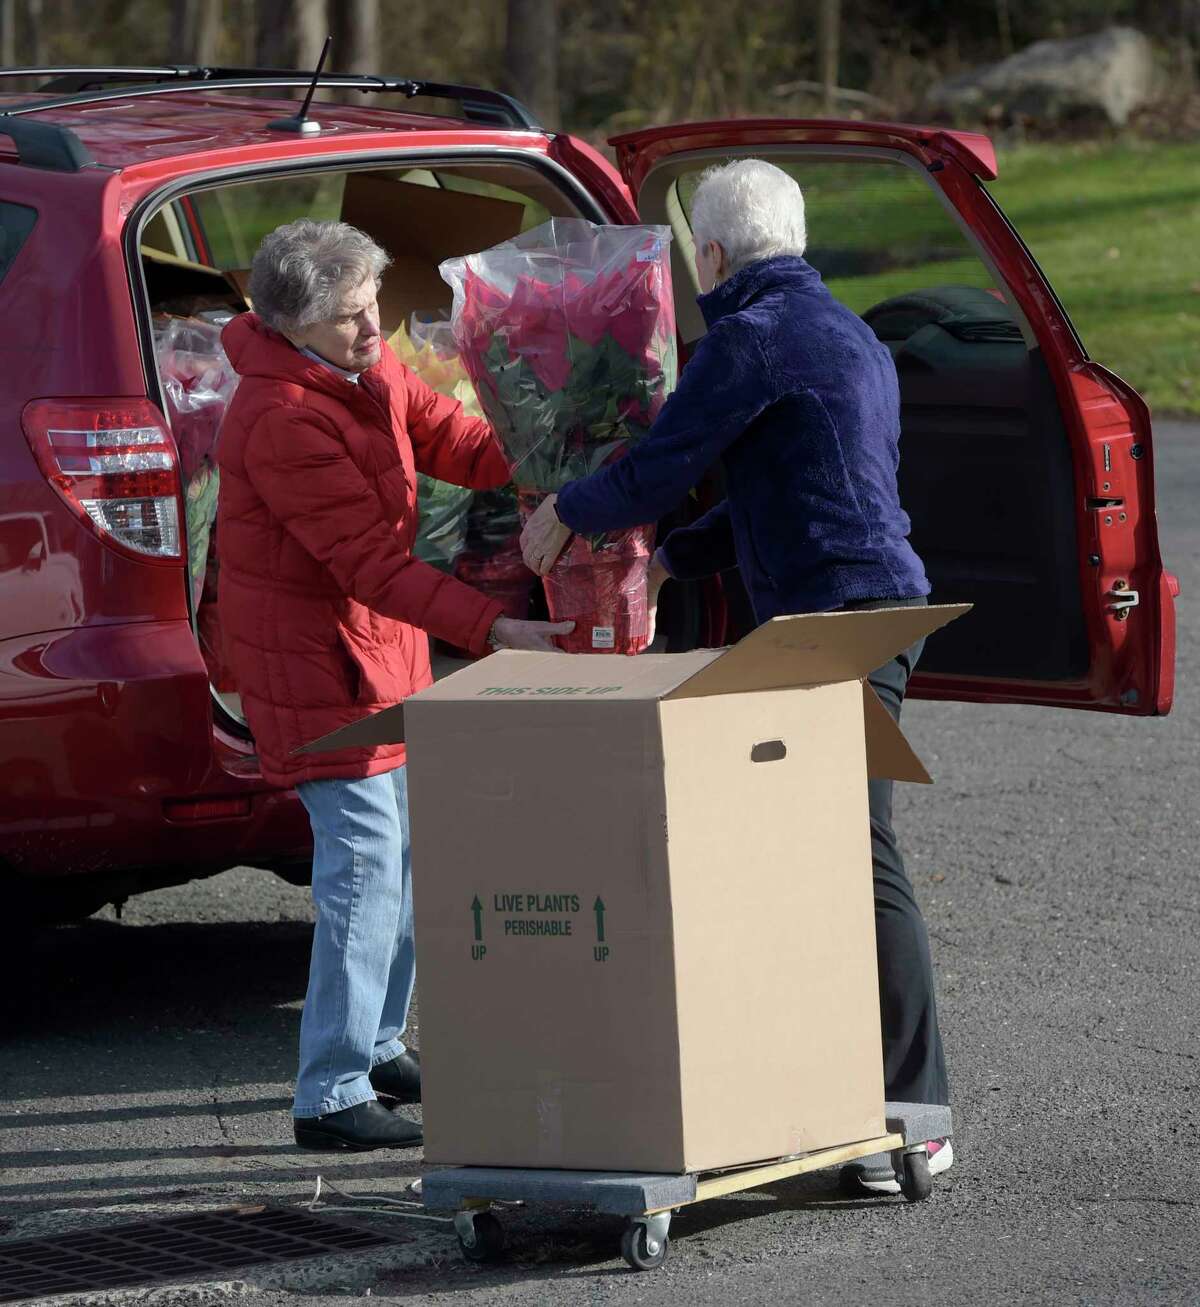 Mickie Sullivan, left, and Judi Fuller, both of Danbury, load Sullivan’s car so she can make deliveries for the Woman’s Club of Danbury/New Fairfield poinsettia sale. Members and volunteers were organizing the plants for delivery and pick-up at the Danbury Police Athletic League building on Tuesday, November 29, 2022. This is the first time the club has held this sale since 2019 due to COVID-19. All proceeds are distributed to area nonprofit agencies and awarded as high school scholarships. Danbury, Conn.